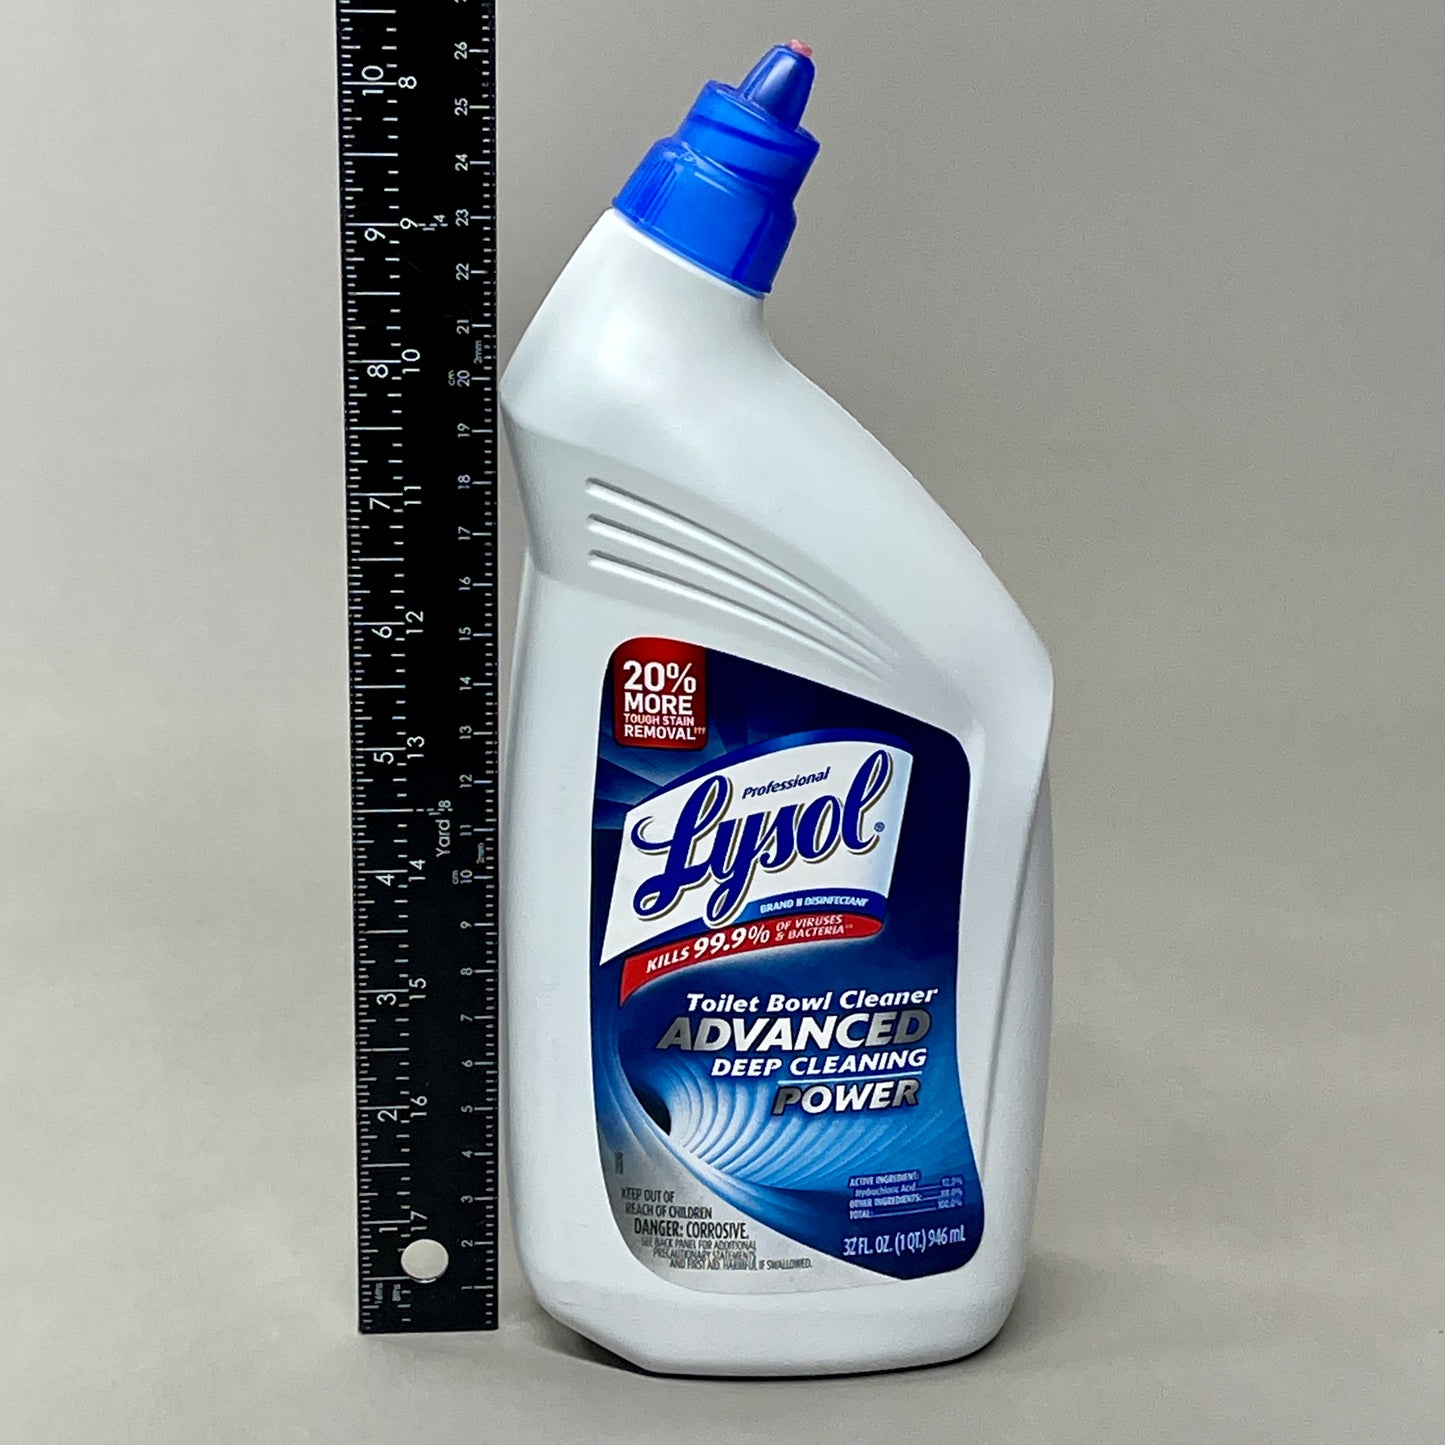 LYSOL Toilet Bowl Cleaner 4-PACK! Advanced Power Deep Cleaning 32 fl oz (New)